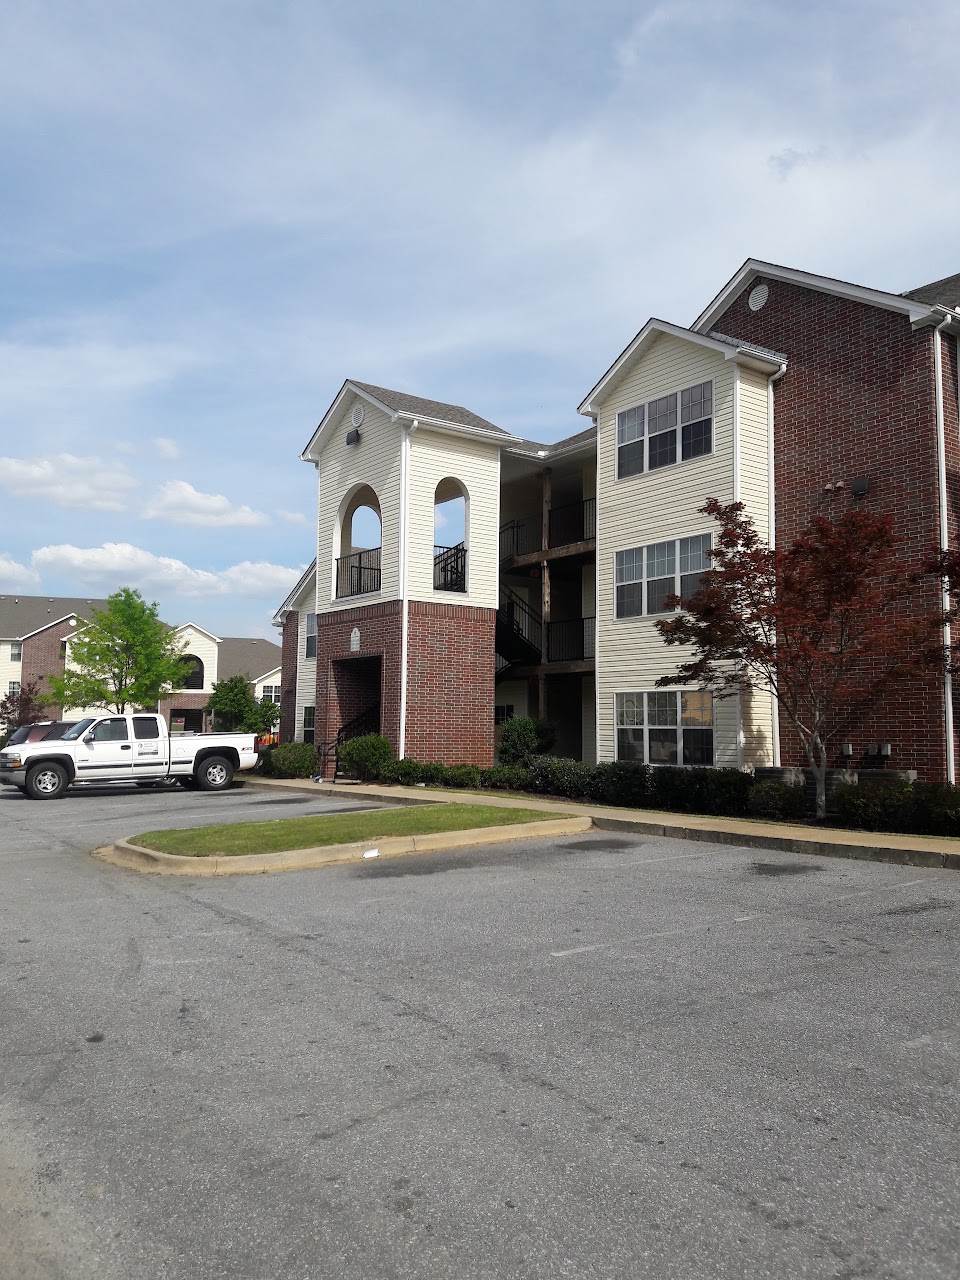 Photo of VICTORY CROSSING APARTMENTS. Affordable housing located at 3390 N LUMPKIN RD COLUMBUS, GA 31903